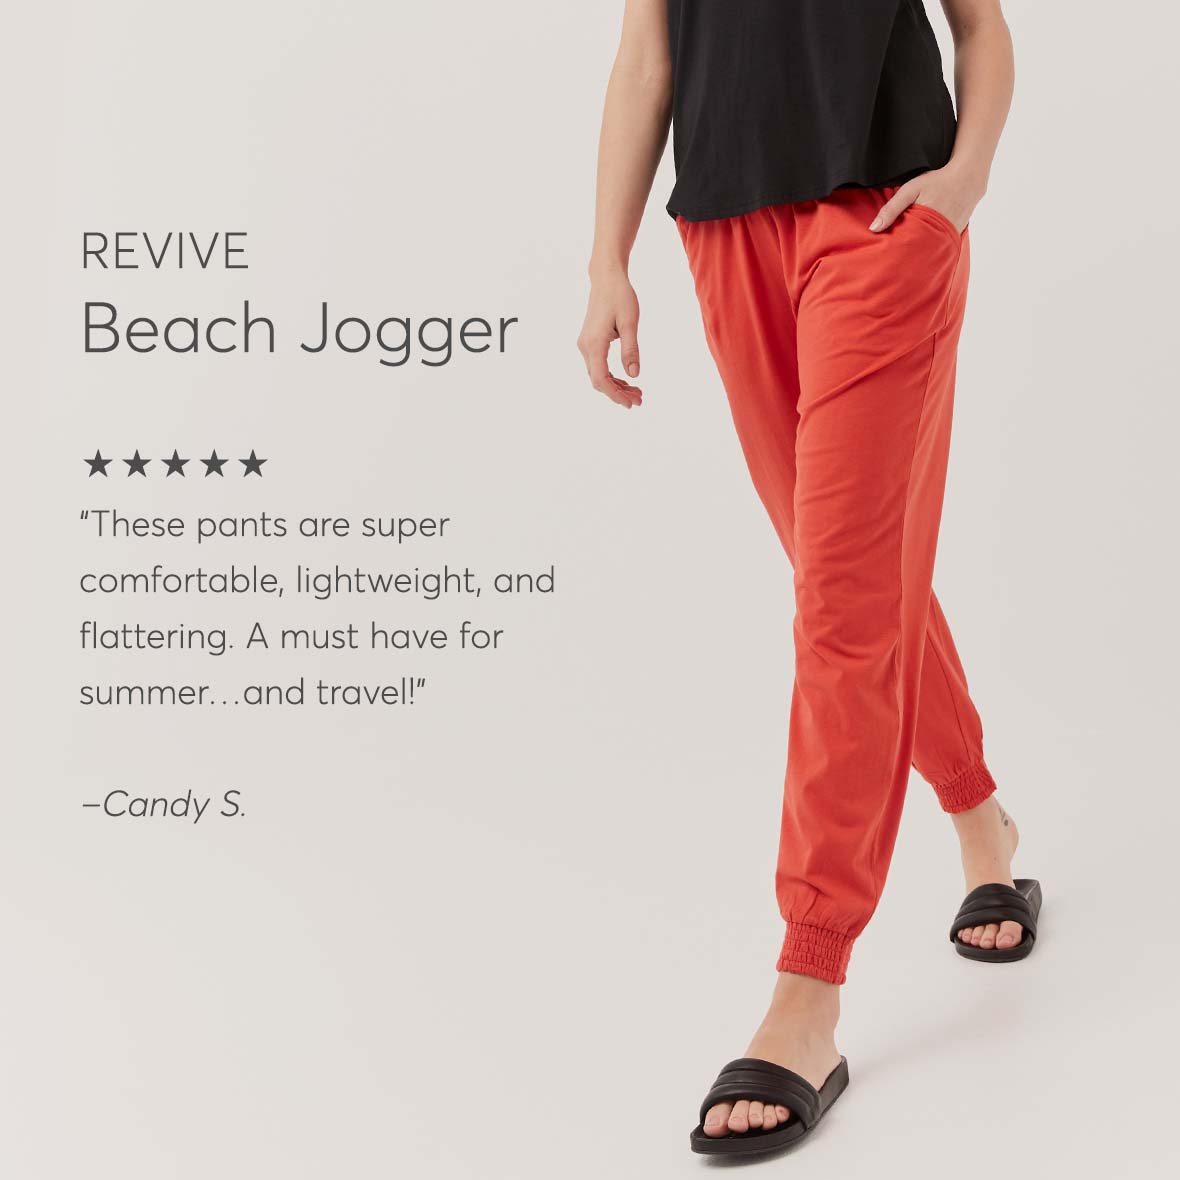 Revive Beach Jogger: These pants are super comfortable, lightweight, and flattering. A must have for summer…and travel!